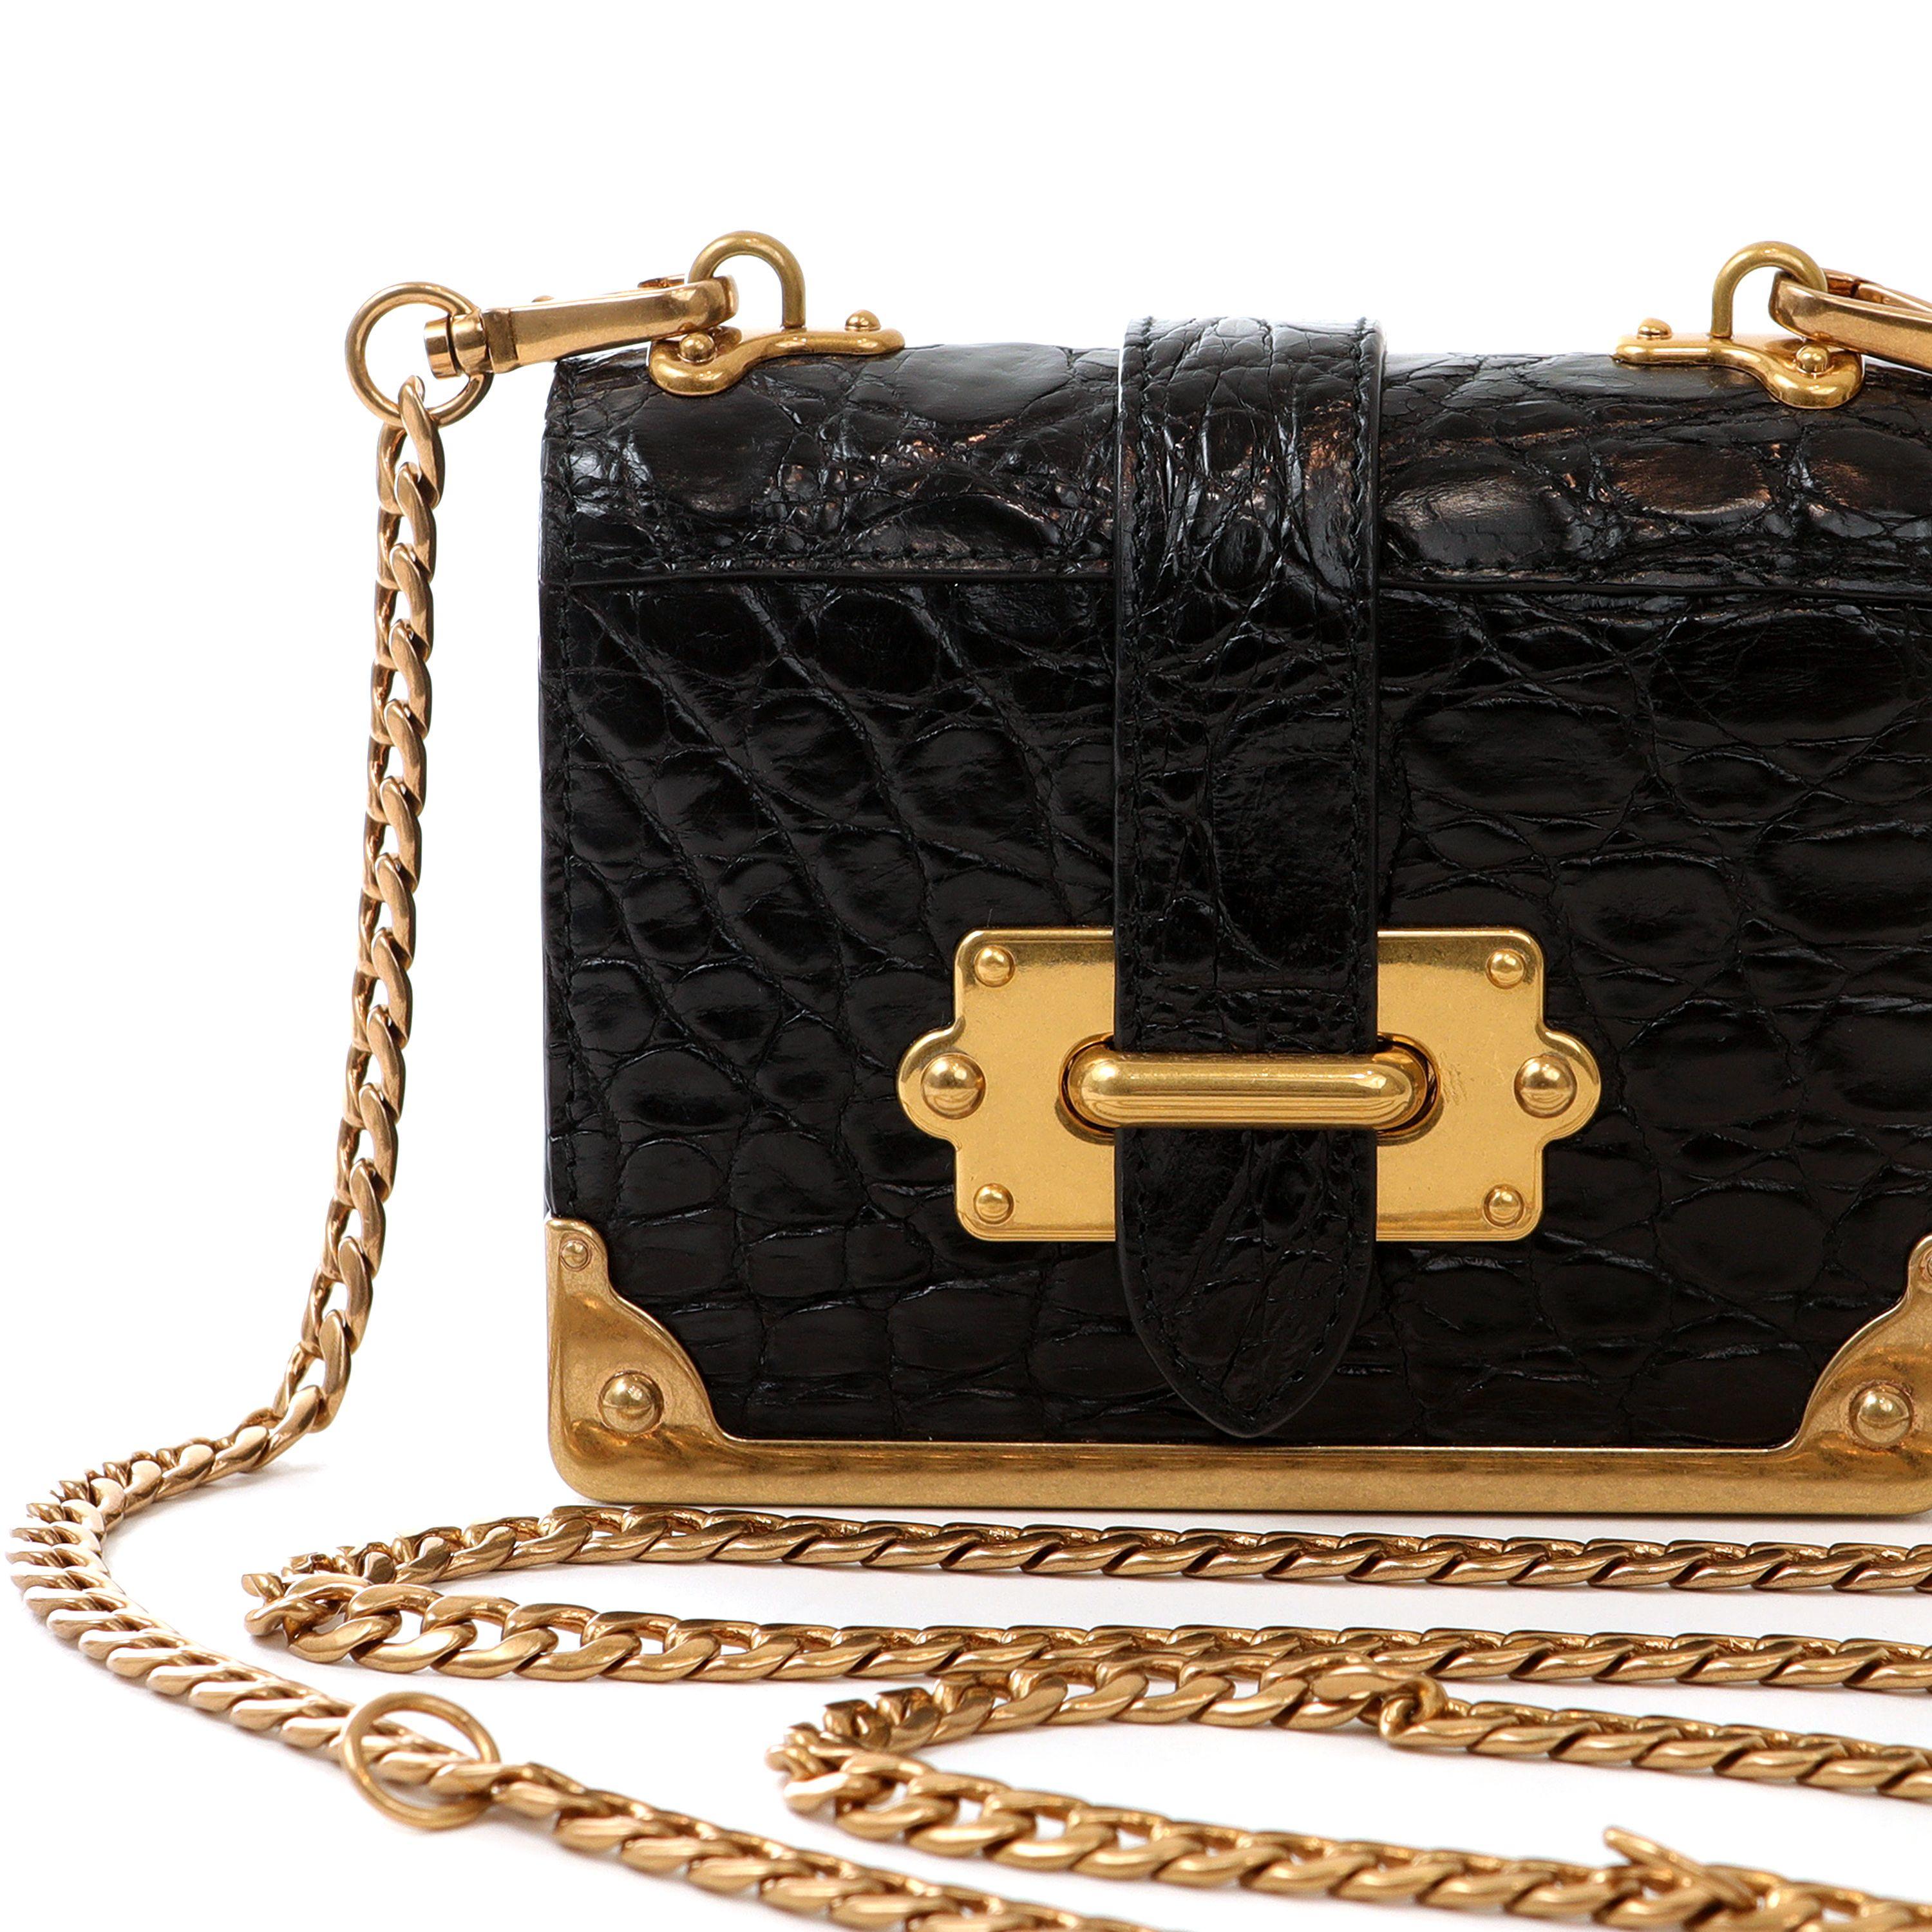 Prada Black Crocodile Micro Cahier Bag with Gold hardware In Excellent Condition For Sale In Palm Beach, FL